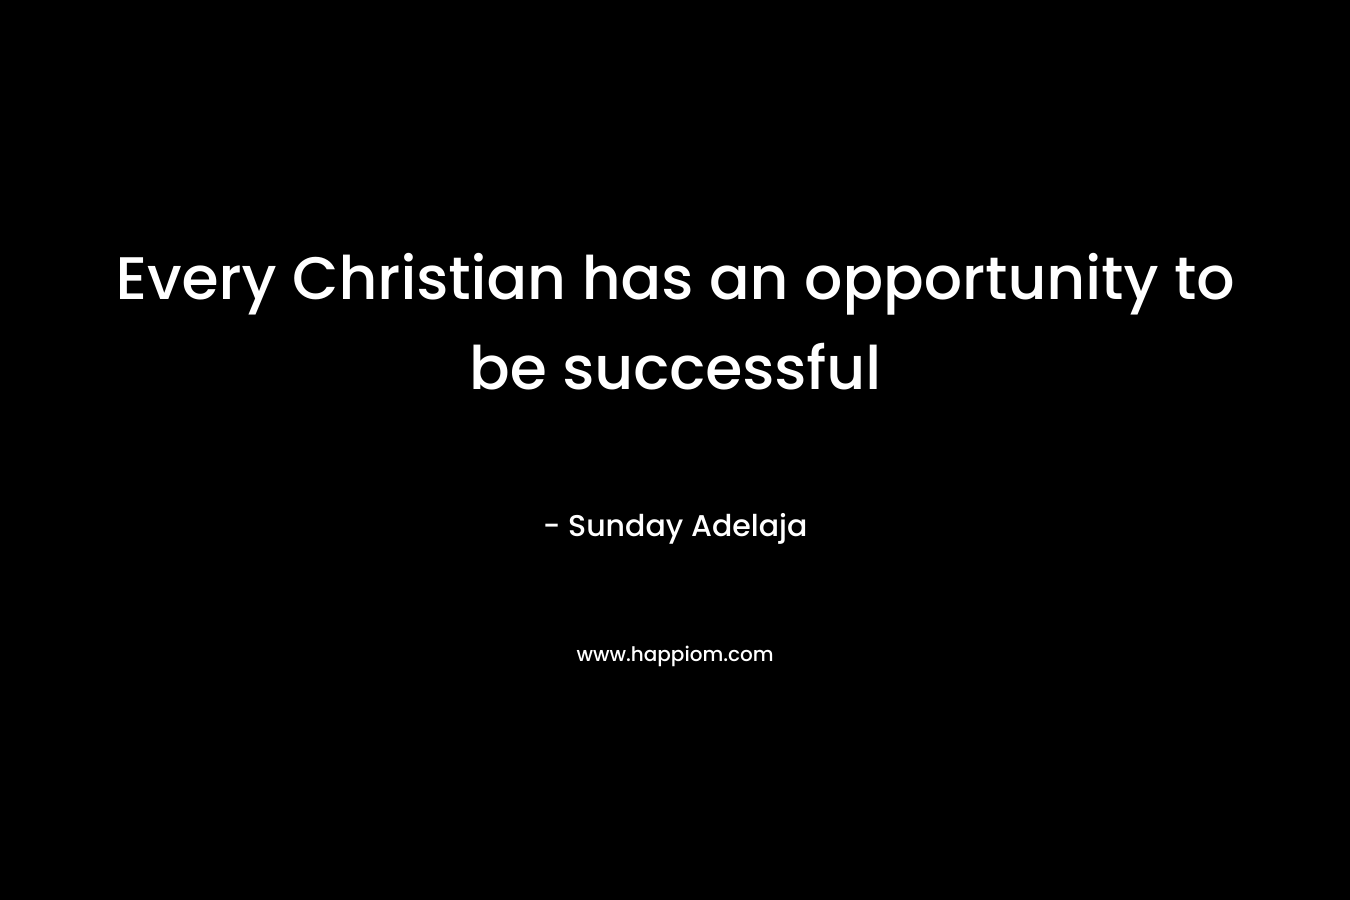 Every Christian has an opportunity to be successful